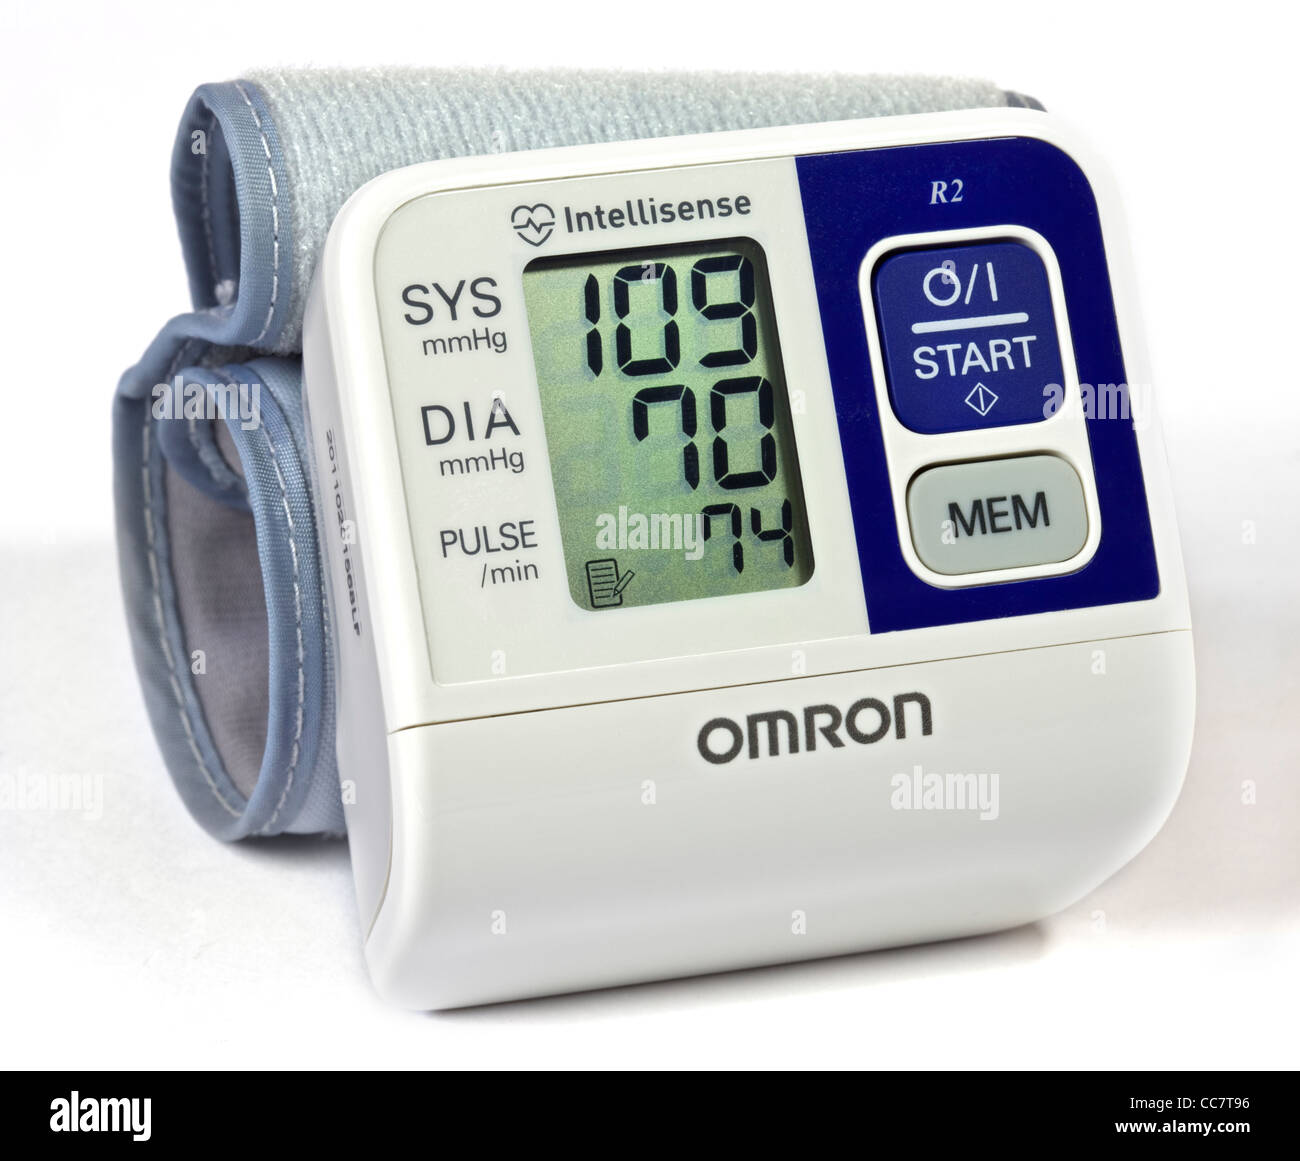 https://c8.alamy.com/comp/CC7T96/omron-portable-blood-pressure-monitor-for-the-wrist-CC7T96.jpg